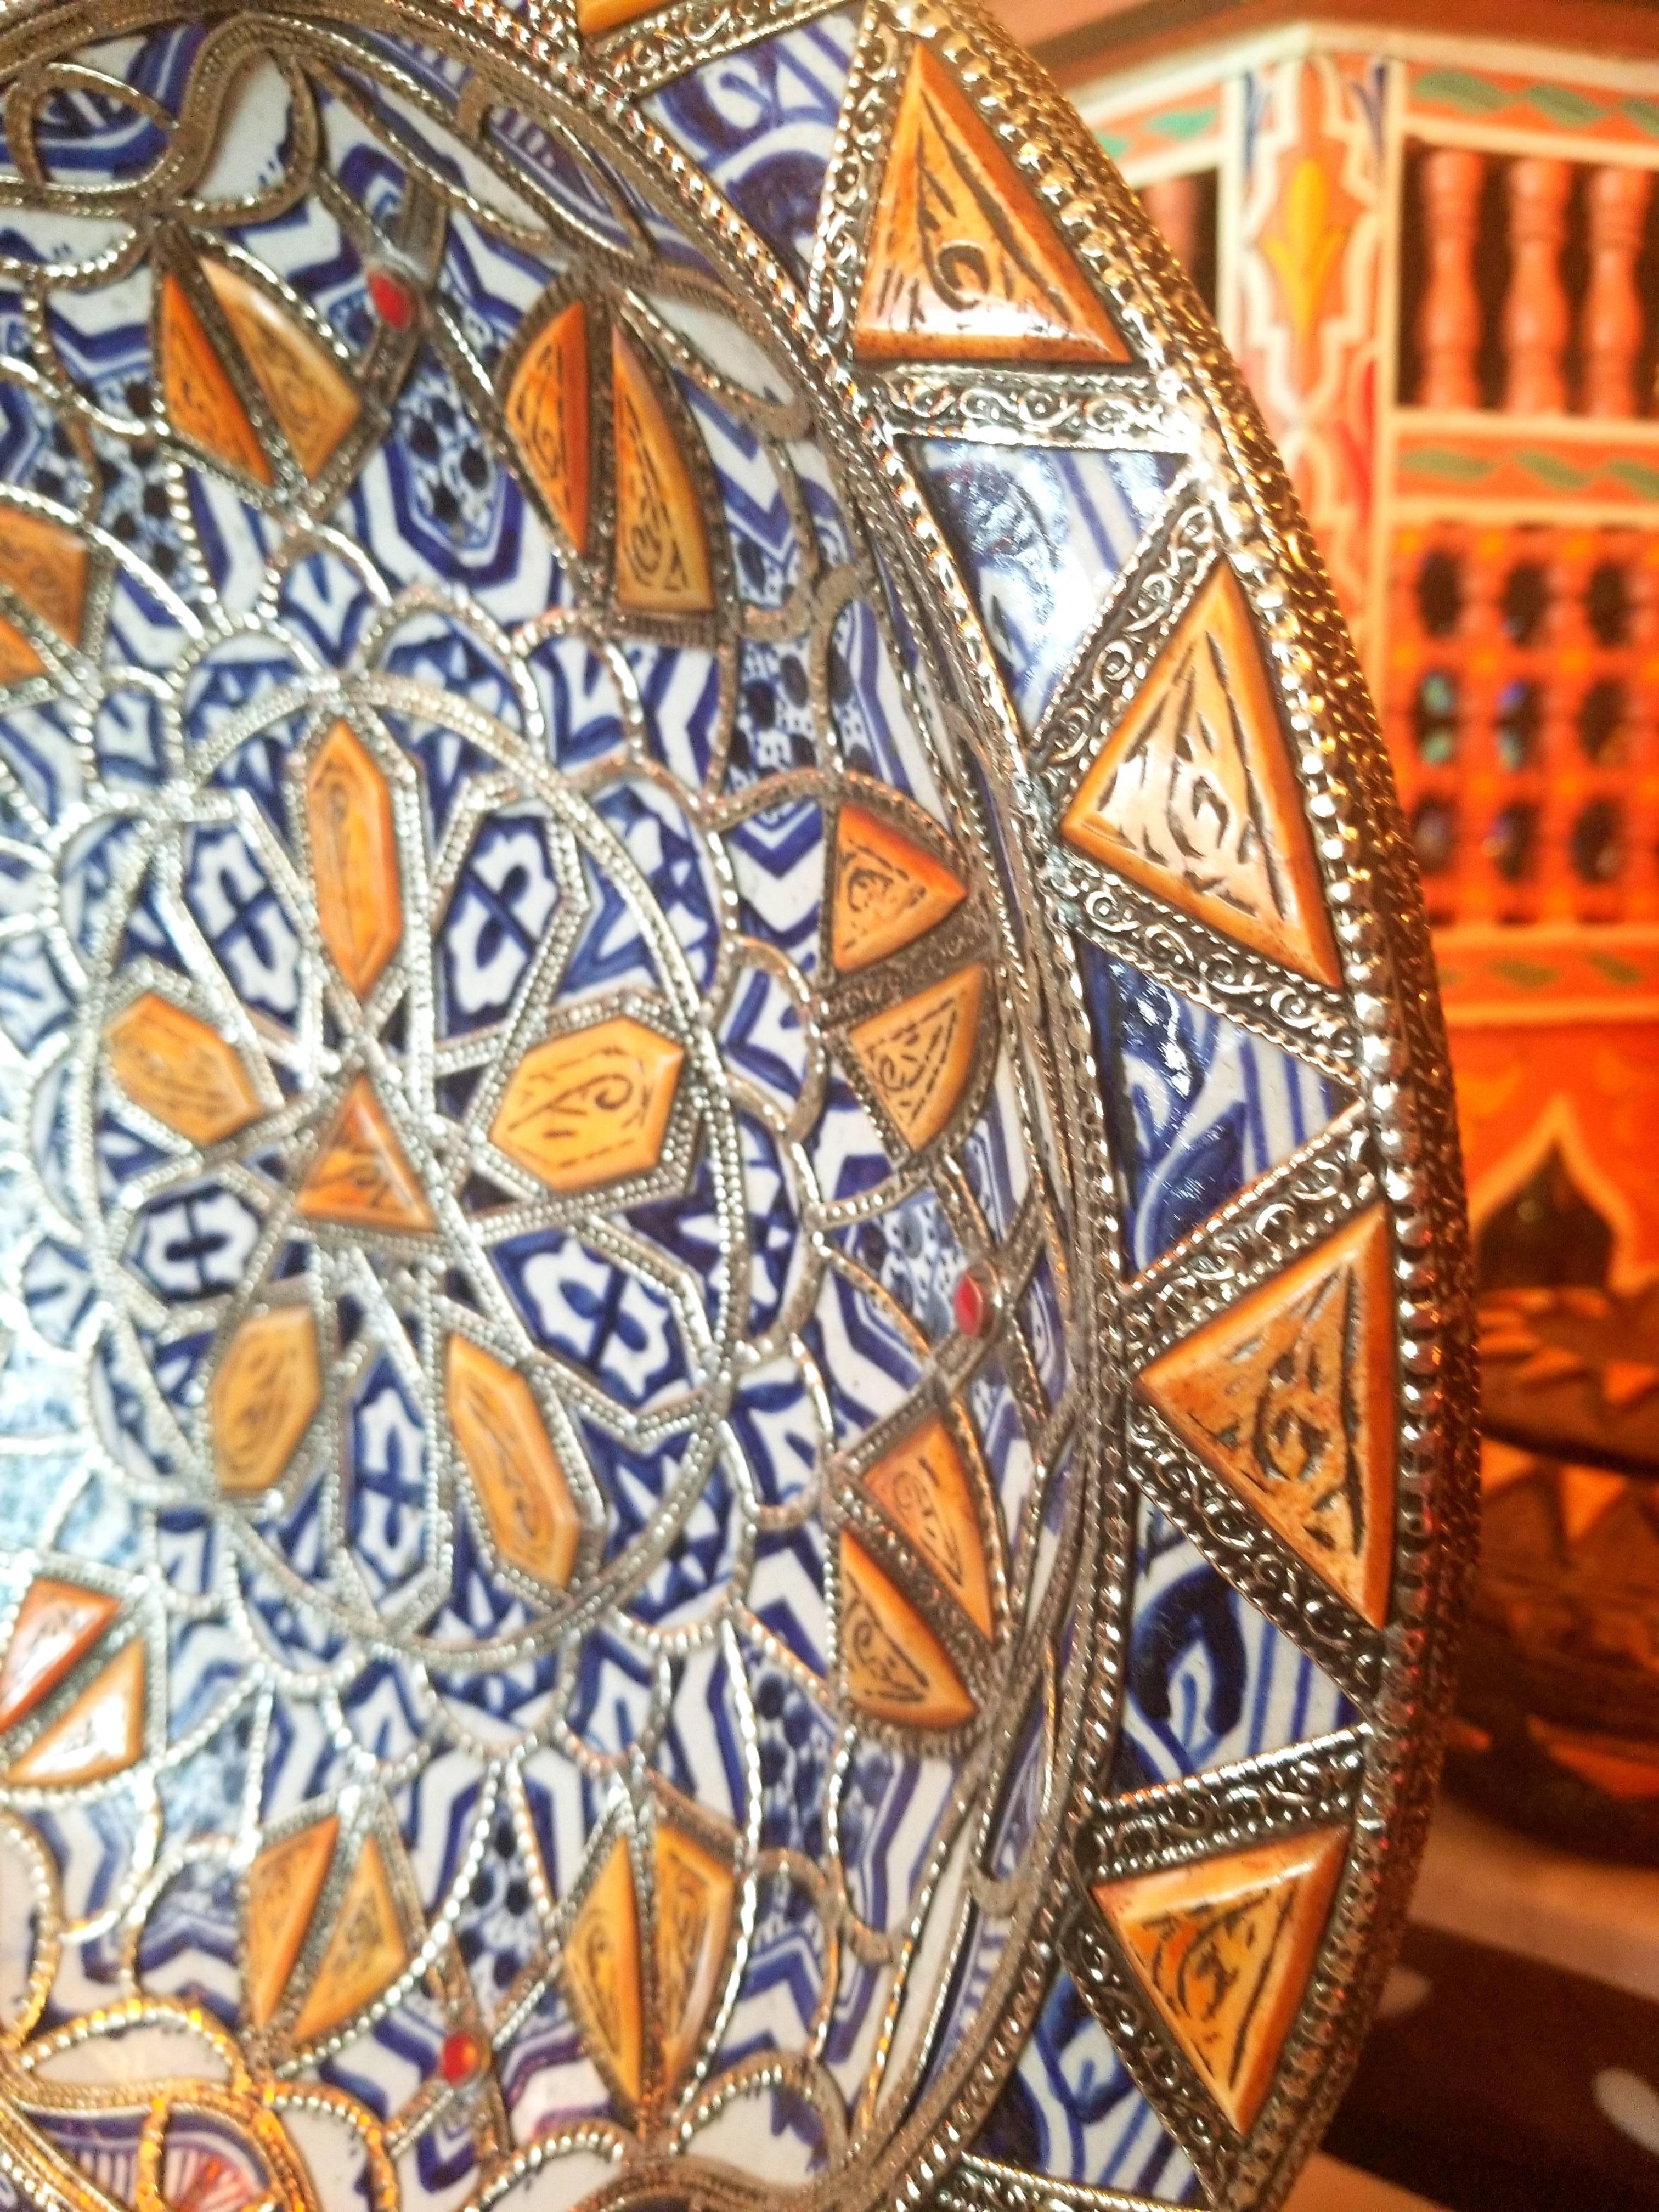 Metal and Camel Bone Inlaid Moroccan Hand-Painted Plate, Blue / White In Excellent Condition For Sale In Orlando, FL